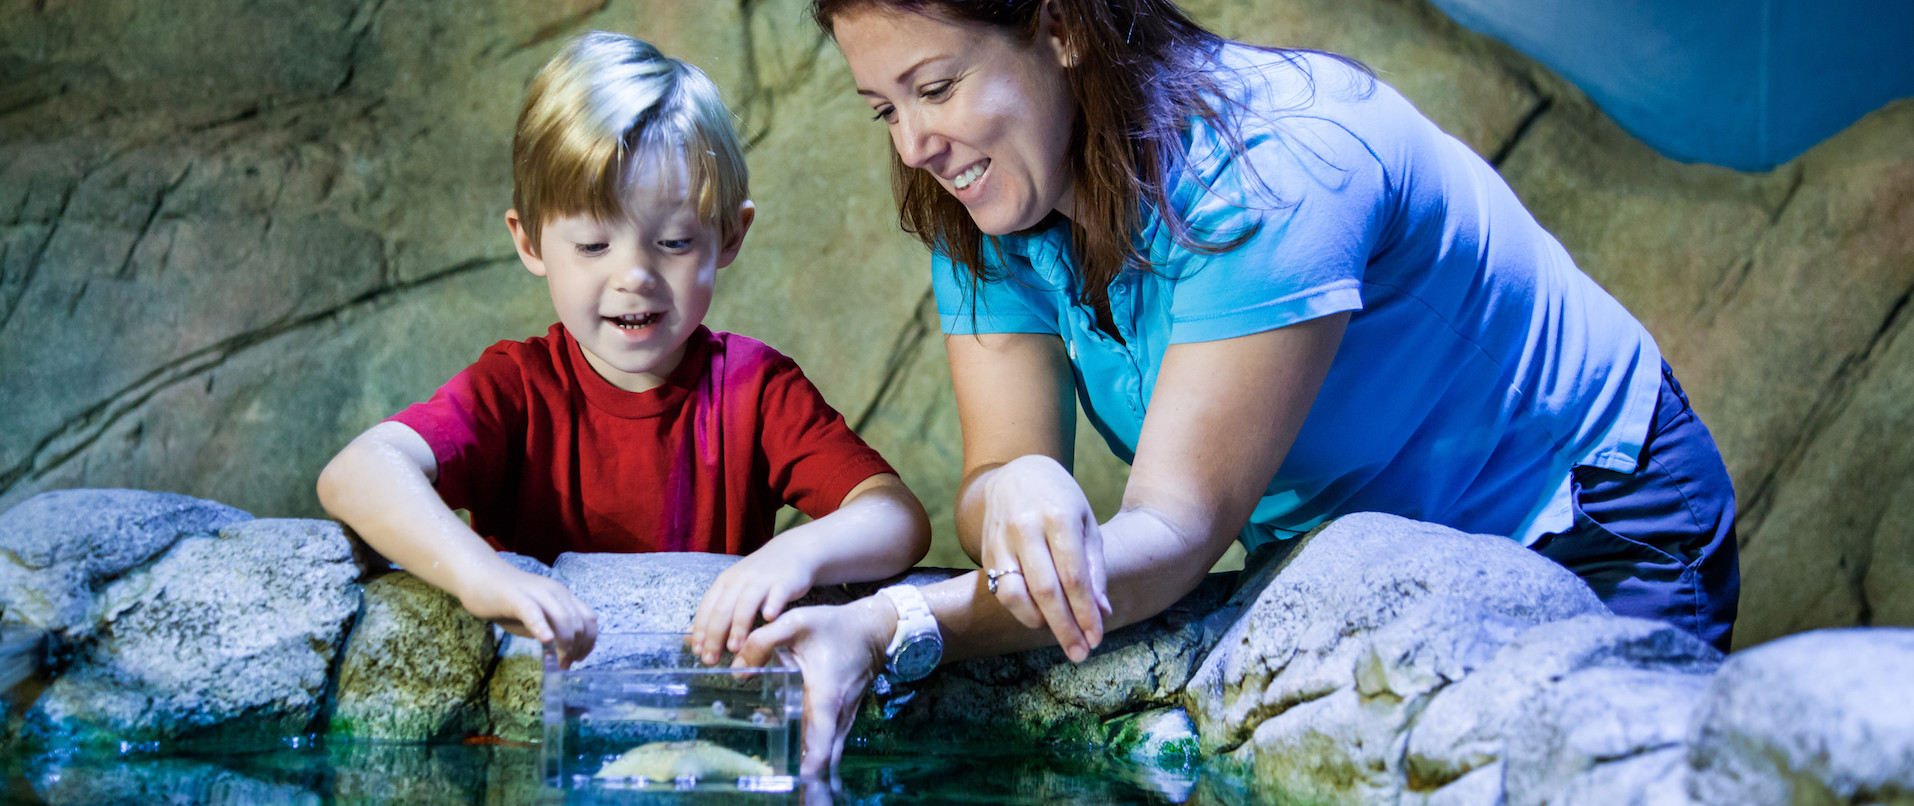 Sea Life touch tank